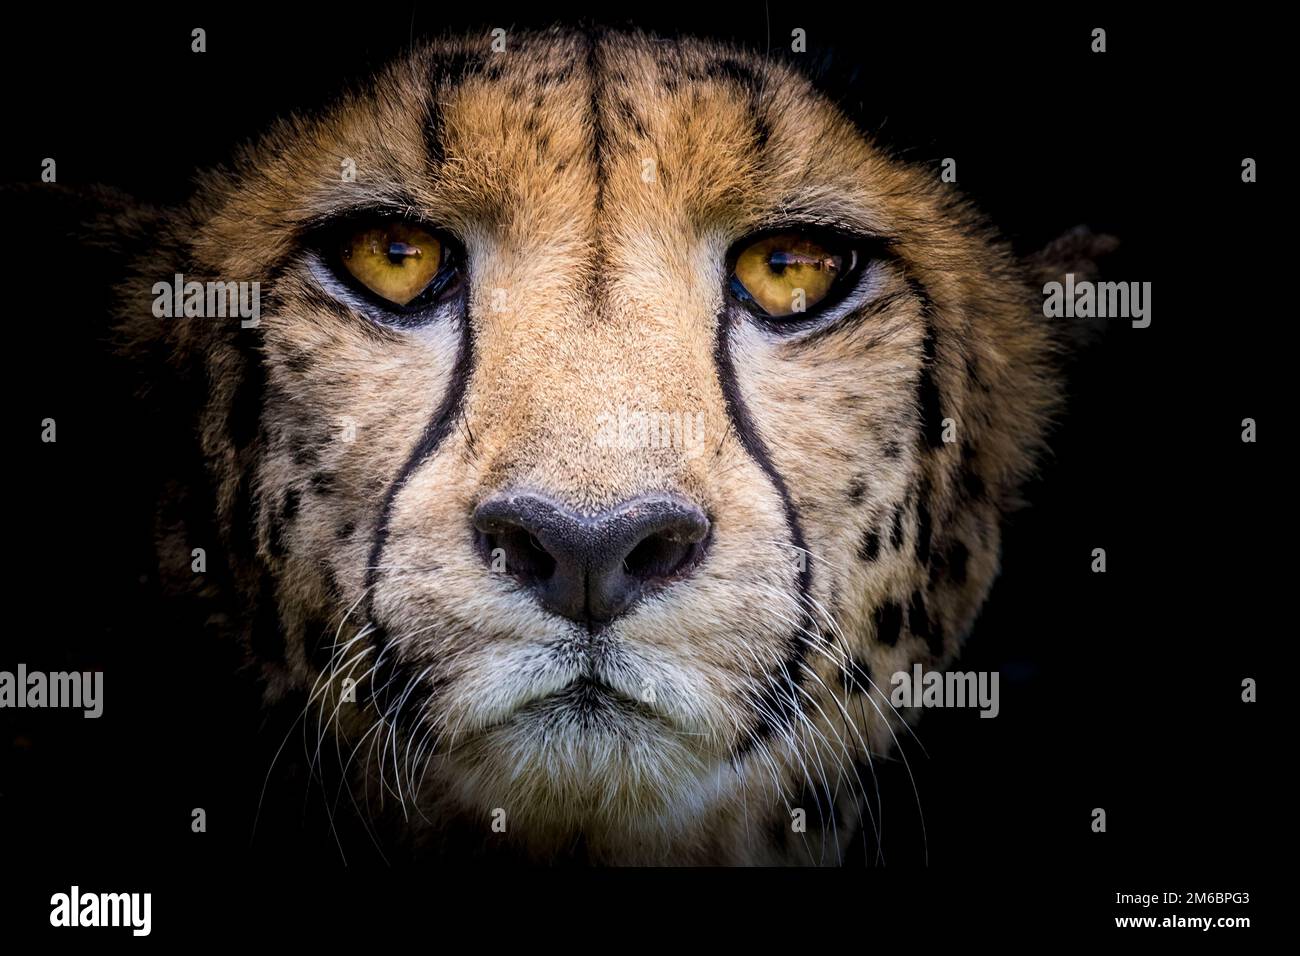 A close up portrait frontal of a cheetah's face with black background Stock Photo